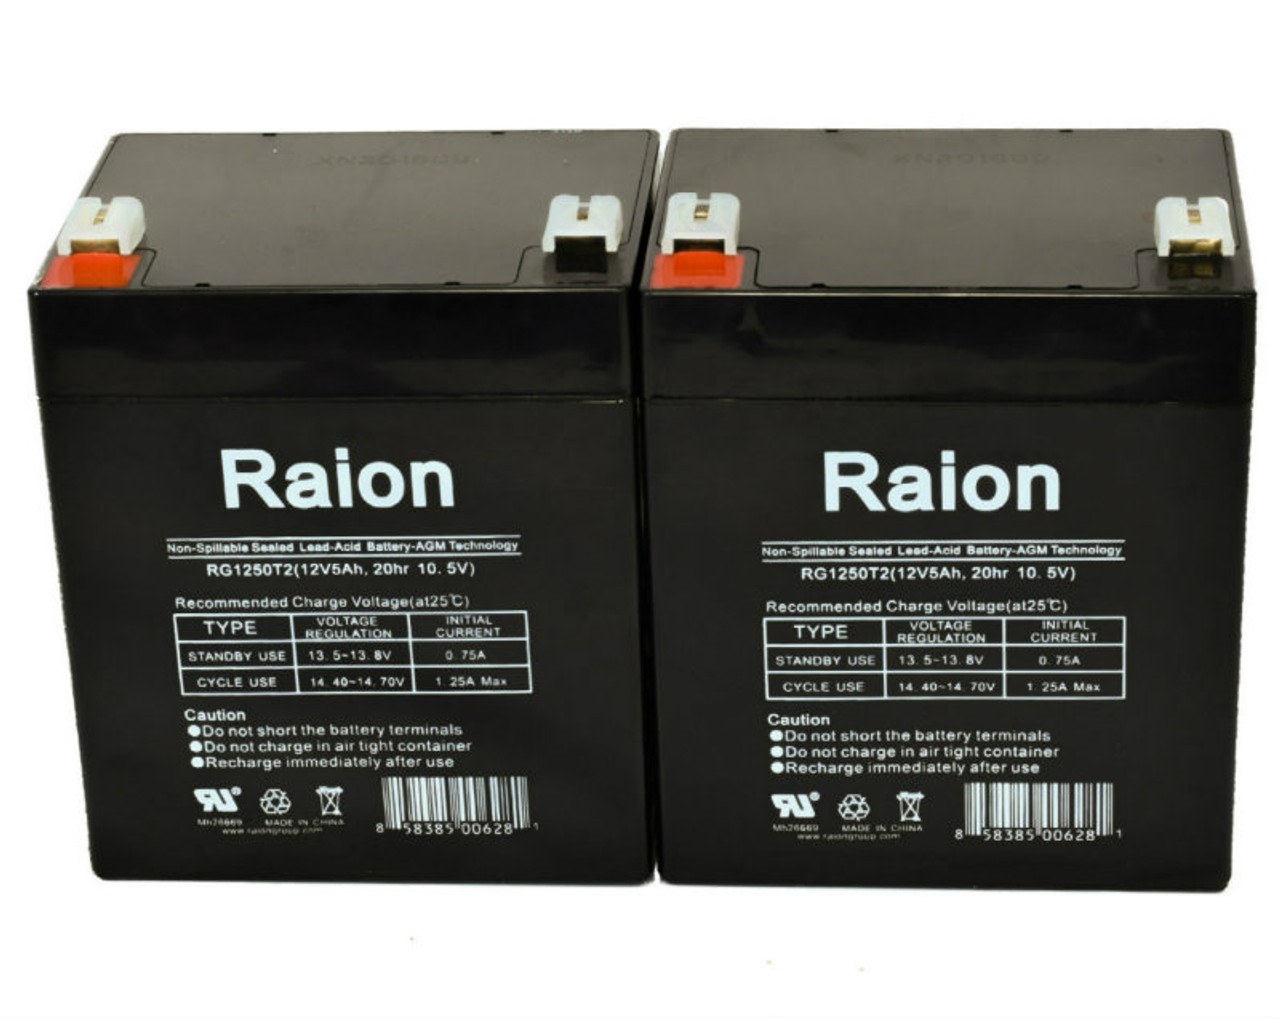 Raion Power 12V 5Ah RG1250T2 Replacement Lead Acid Battery for Narada 6-FM-4 - 2 Pack